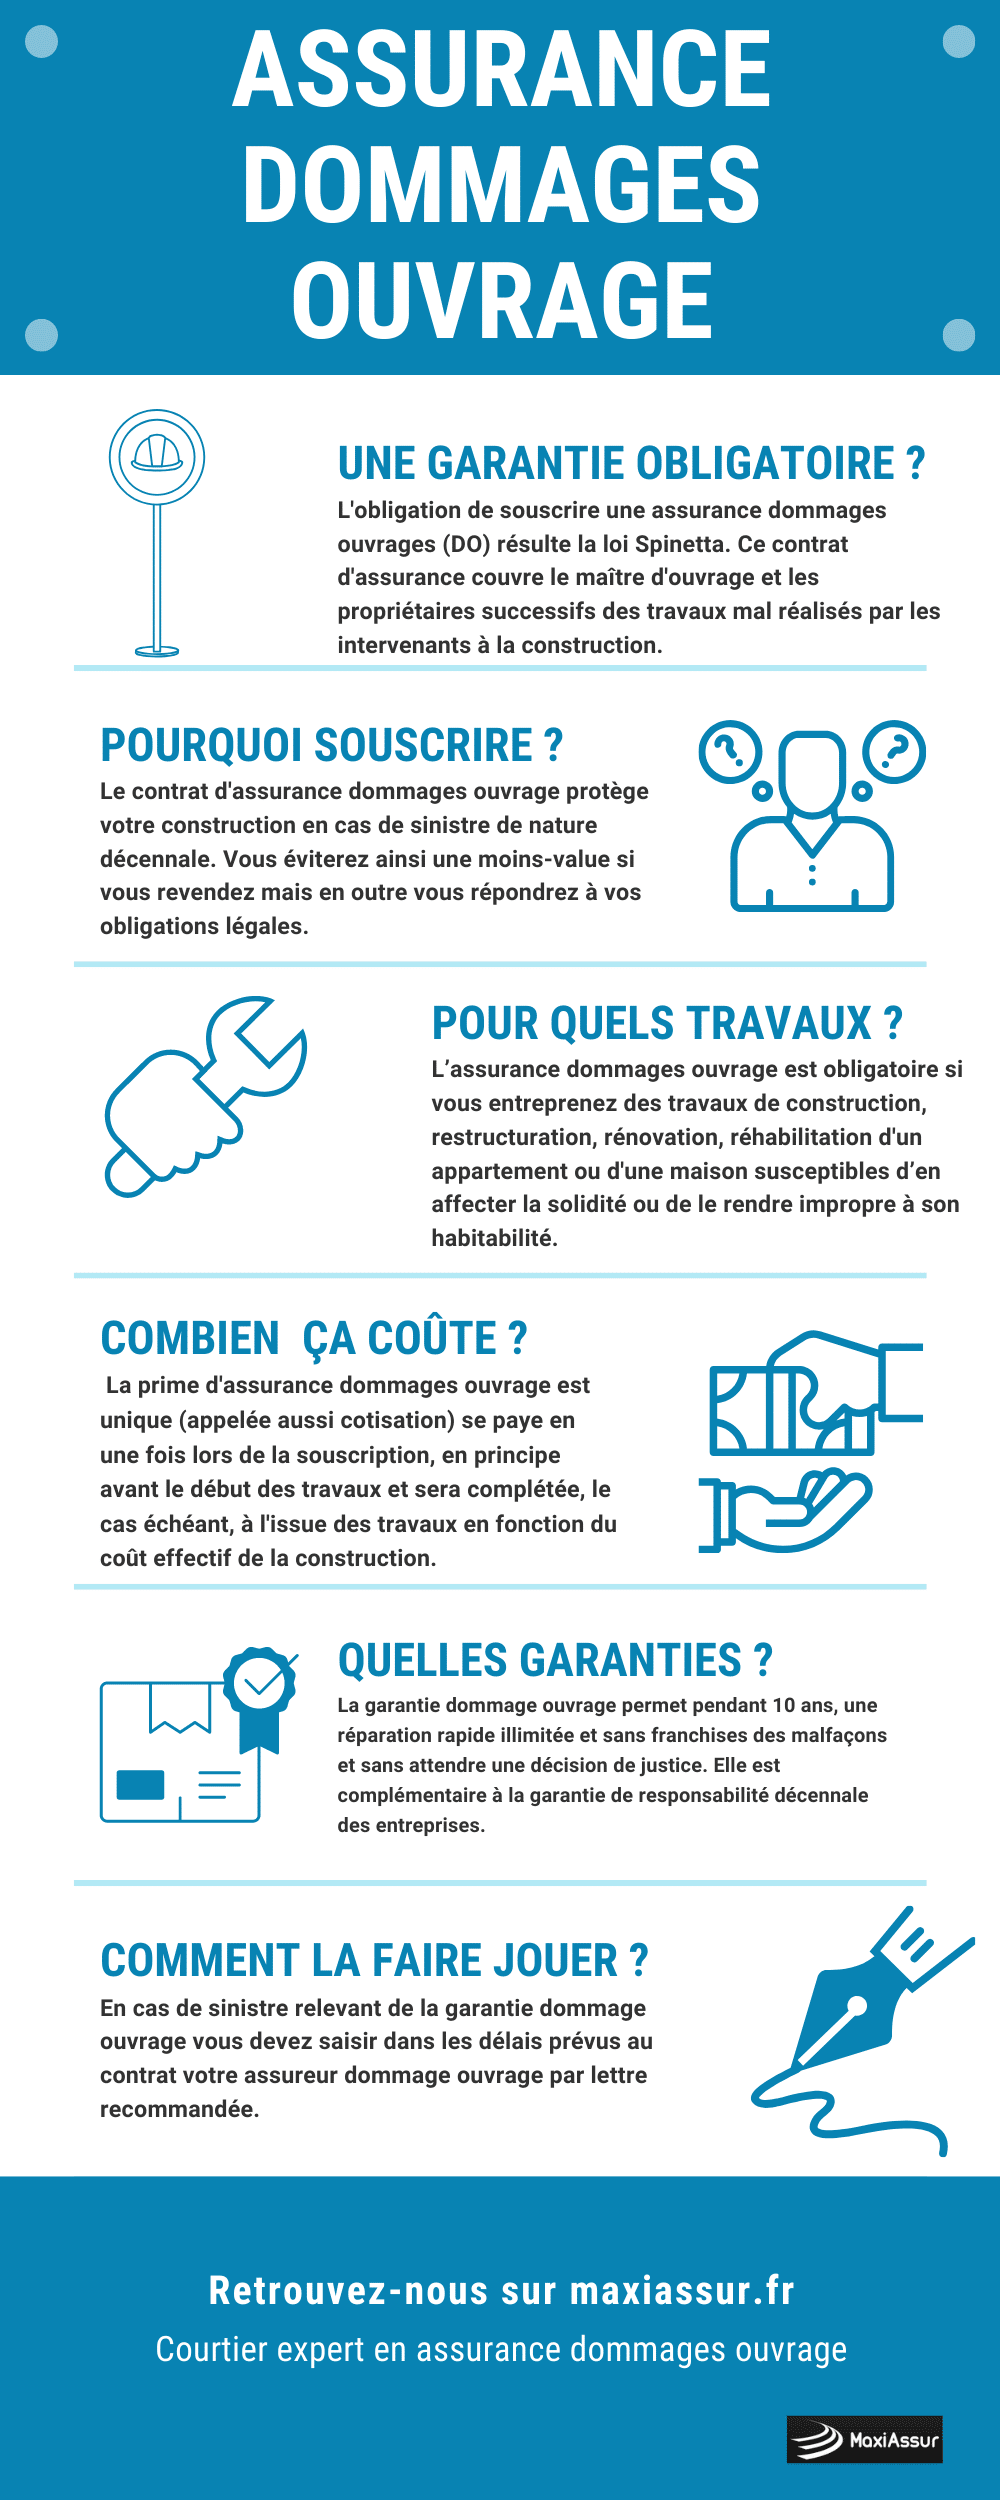 Infographie assurance dommages ouvrage